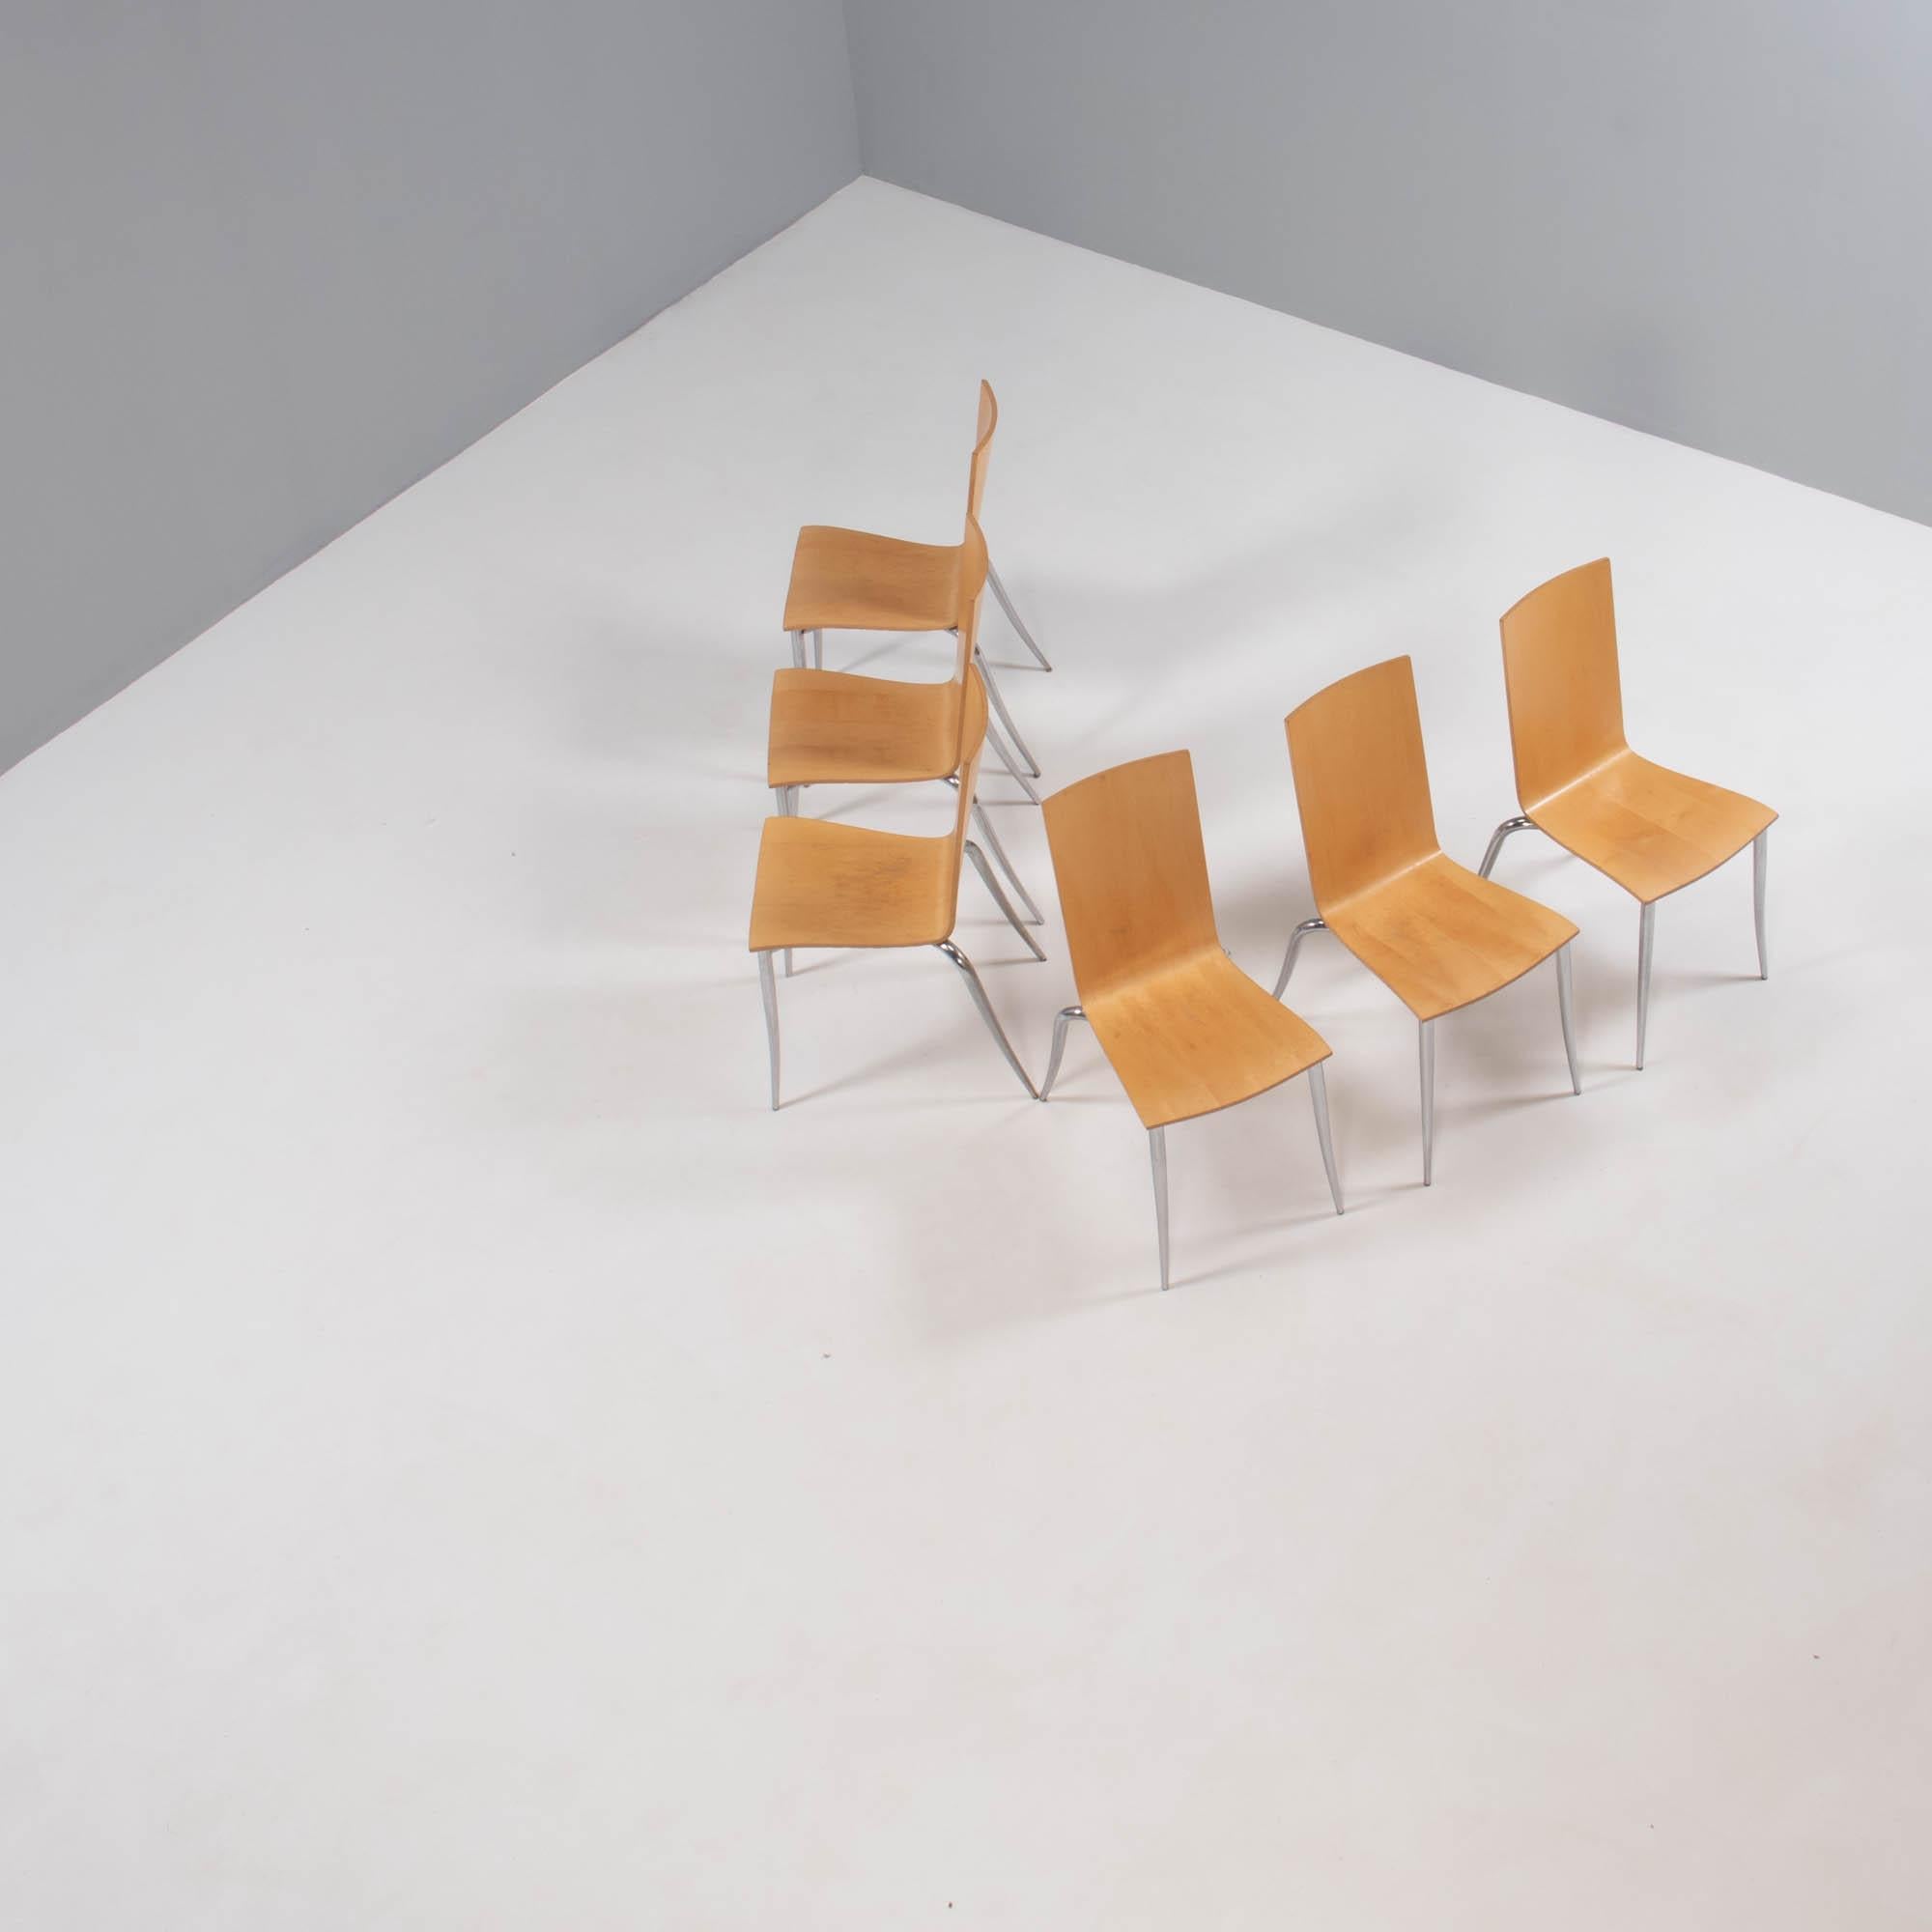 Designed by Philippe Starck for Driade, the Olly Tango dining chairs are a fantastic example of post-modernist design.

Constructed from plywood, the seats combine soft curves with sleek straight lines and sit on chromed tubular steel legs that